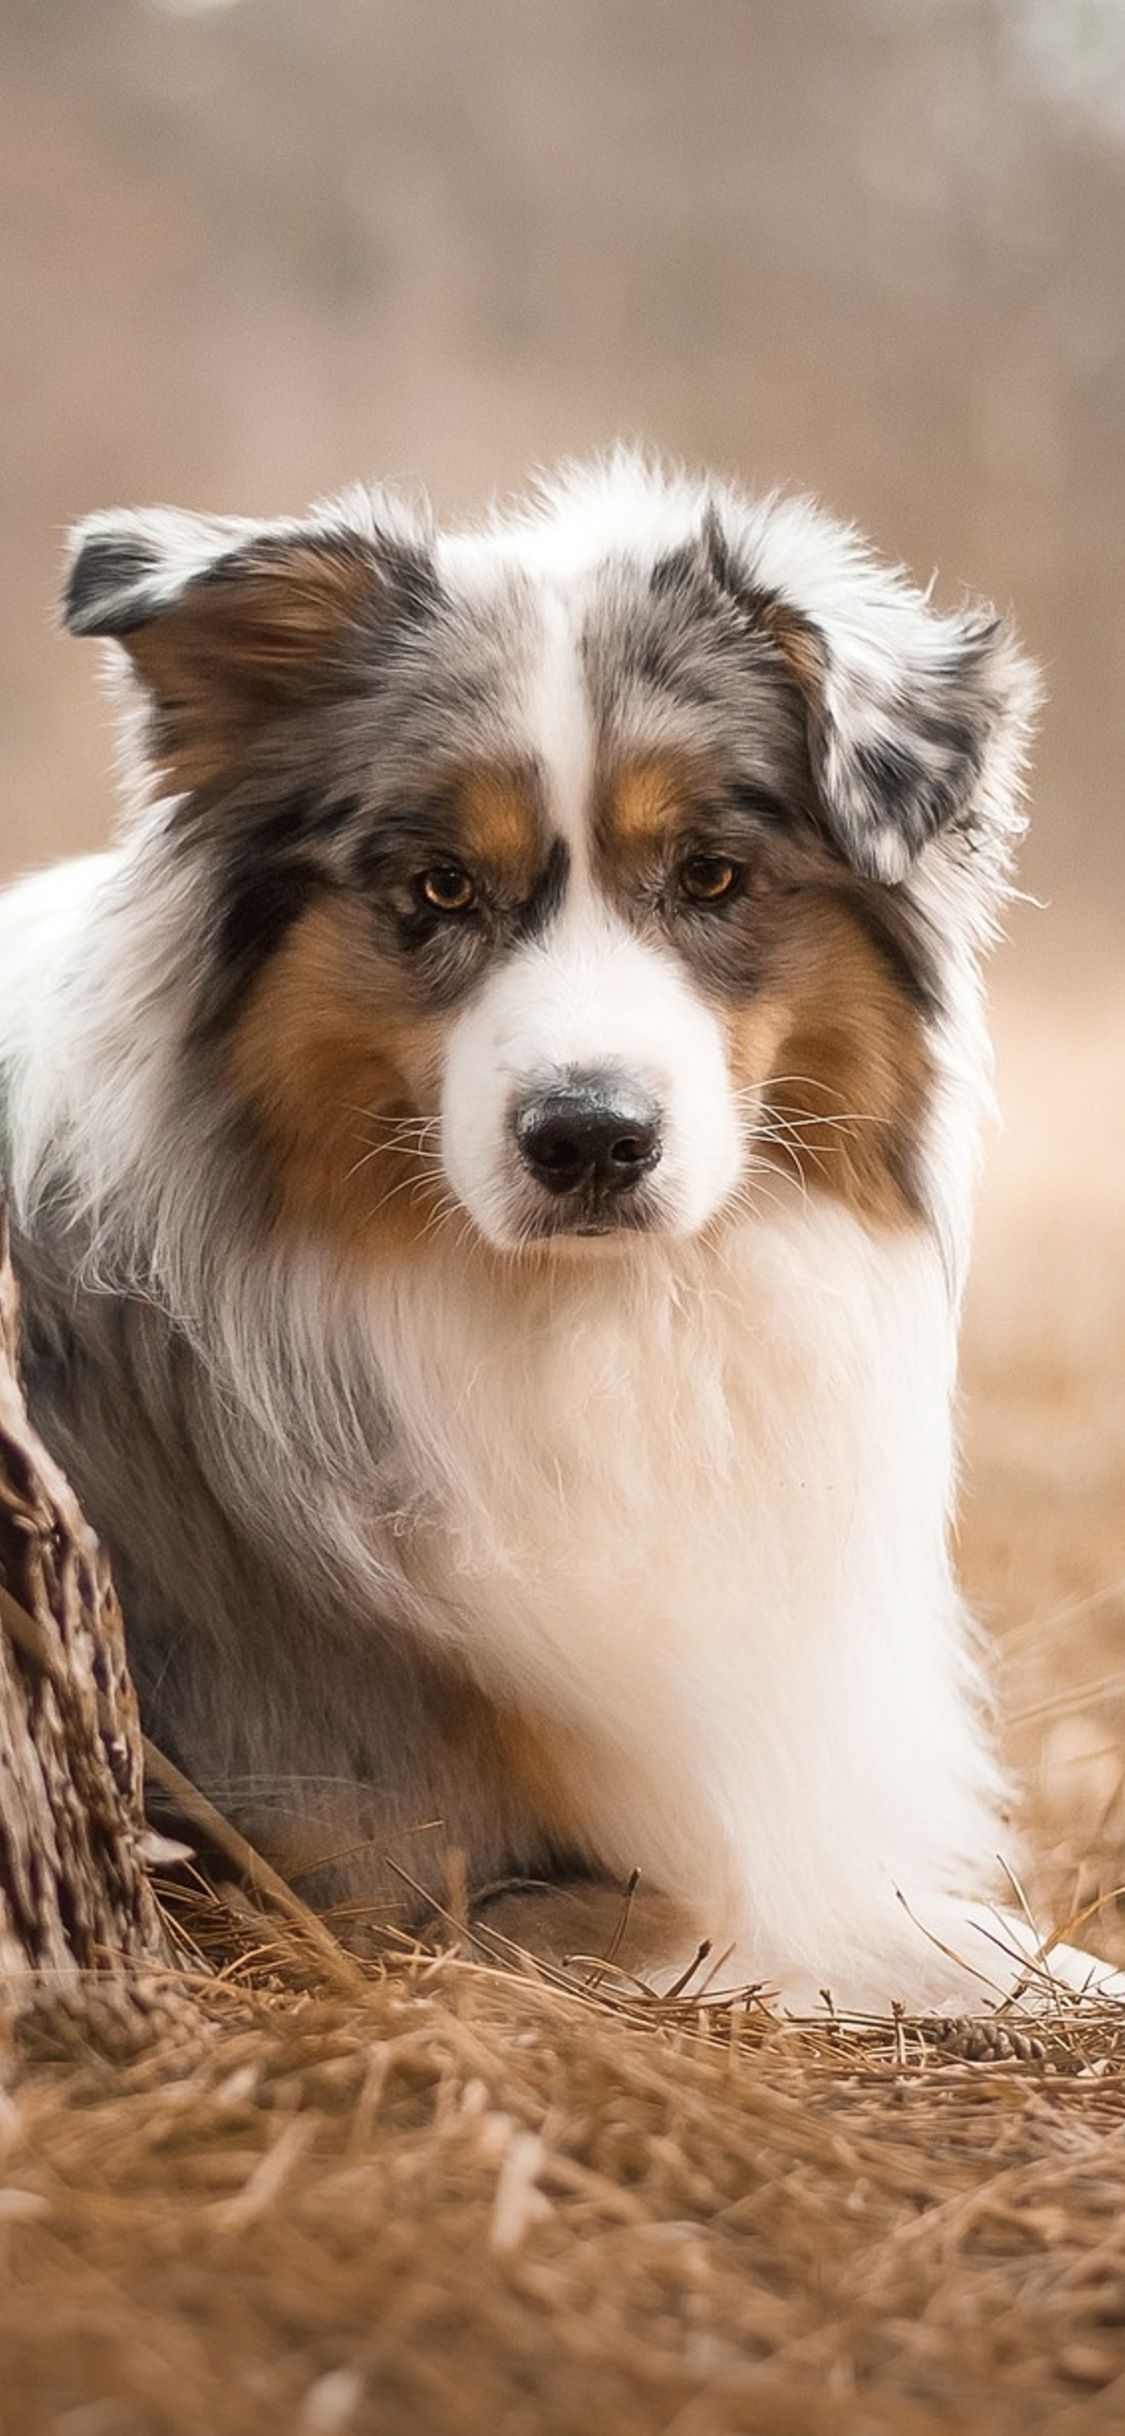 Australian Shepherd Dog iPhone XS, iPhone iPhone X HD 4k Wallpaper, Image, Background, Photo and Picture